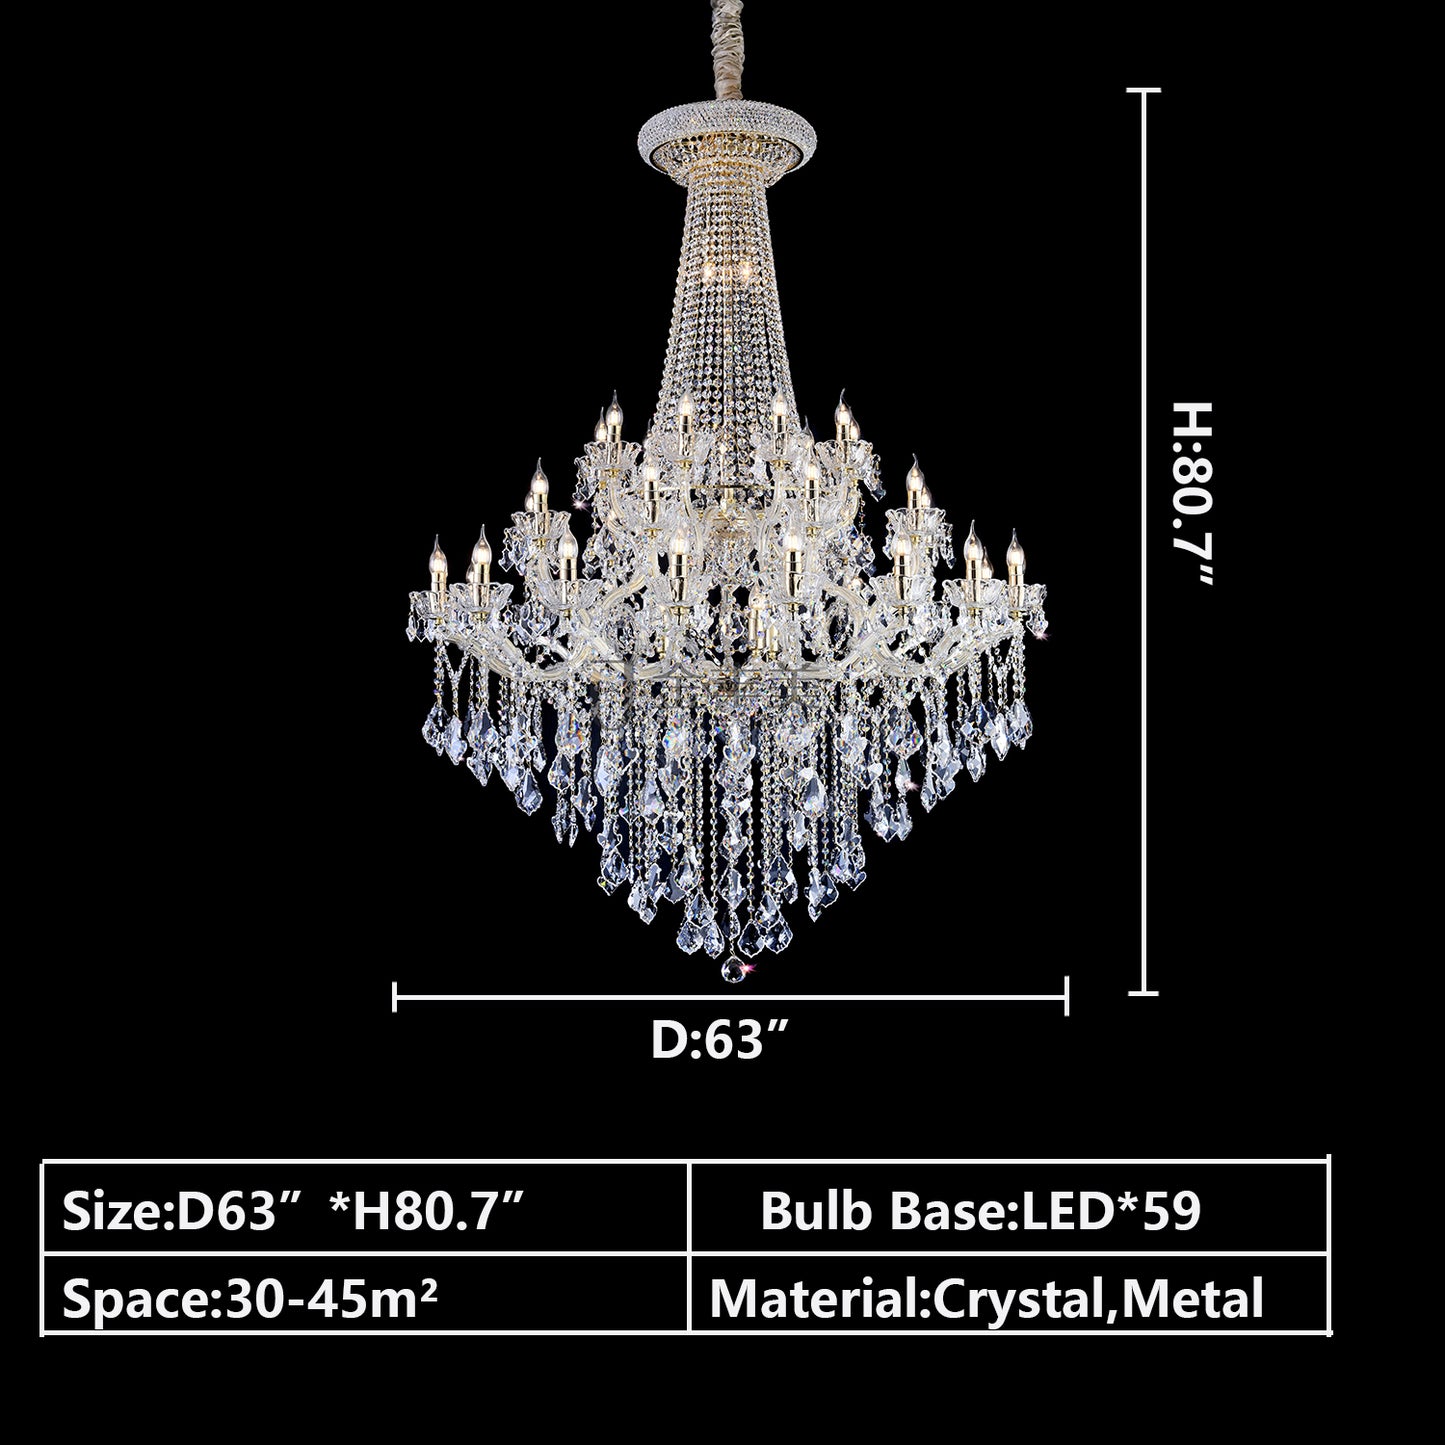 D63.0"*H80.7" chandelier,chandeliers,pendant,crystal,metal,clear crystal,candle,branch,round,raindrop,teardrop,extra large,oversized,large,huge,big,round,living room,luxury,dining room,modern,foyer,stairs,hallway,entrys,hotel lobby,duplex hall,loft